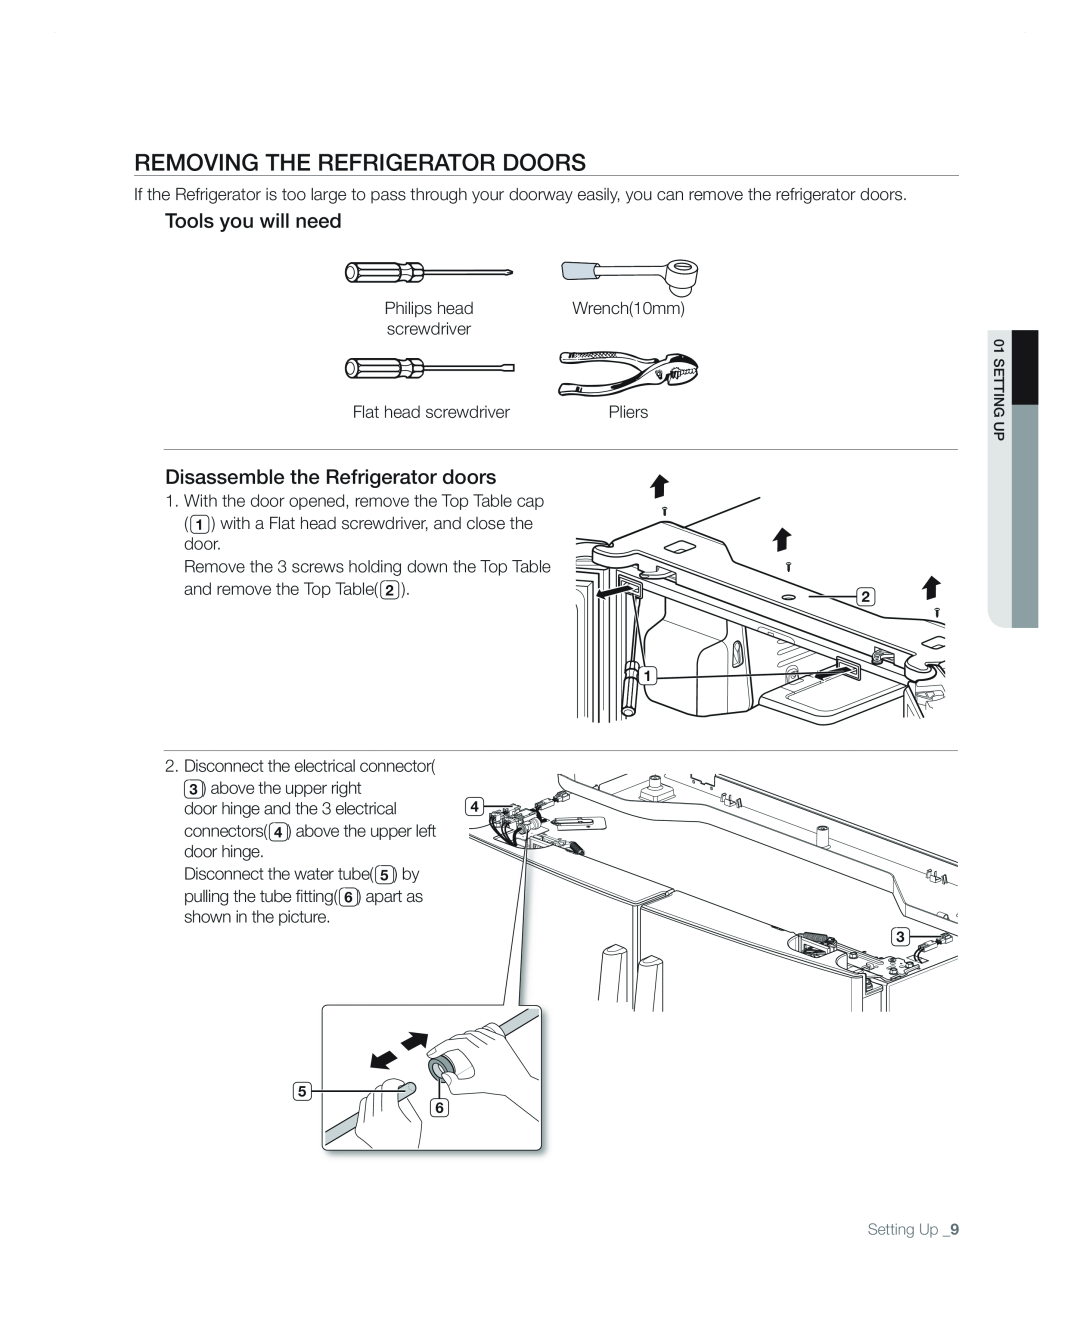 Samsung RF267AA user manual Removing the refrigerator doors, Tools you will need, Disassemble the Refrigerator doors 